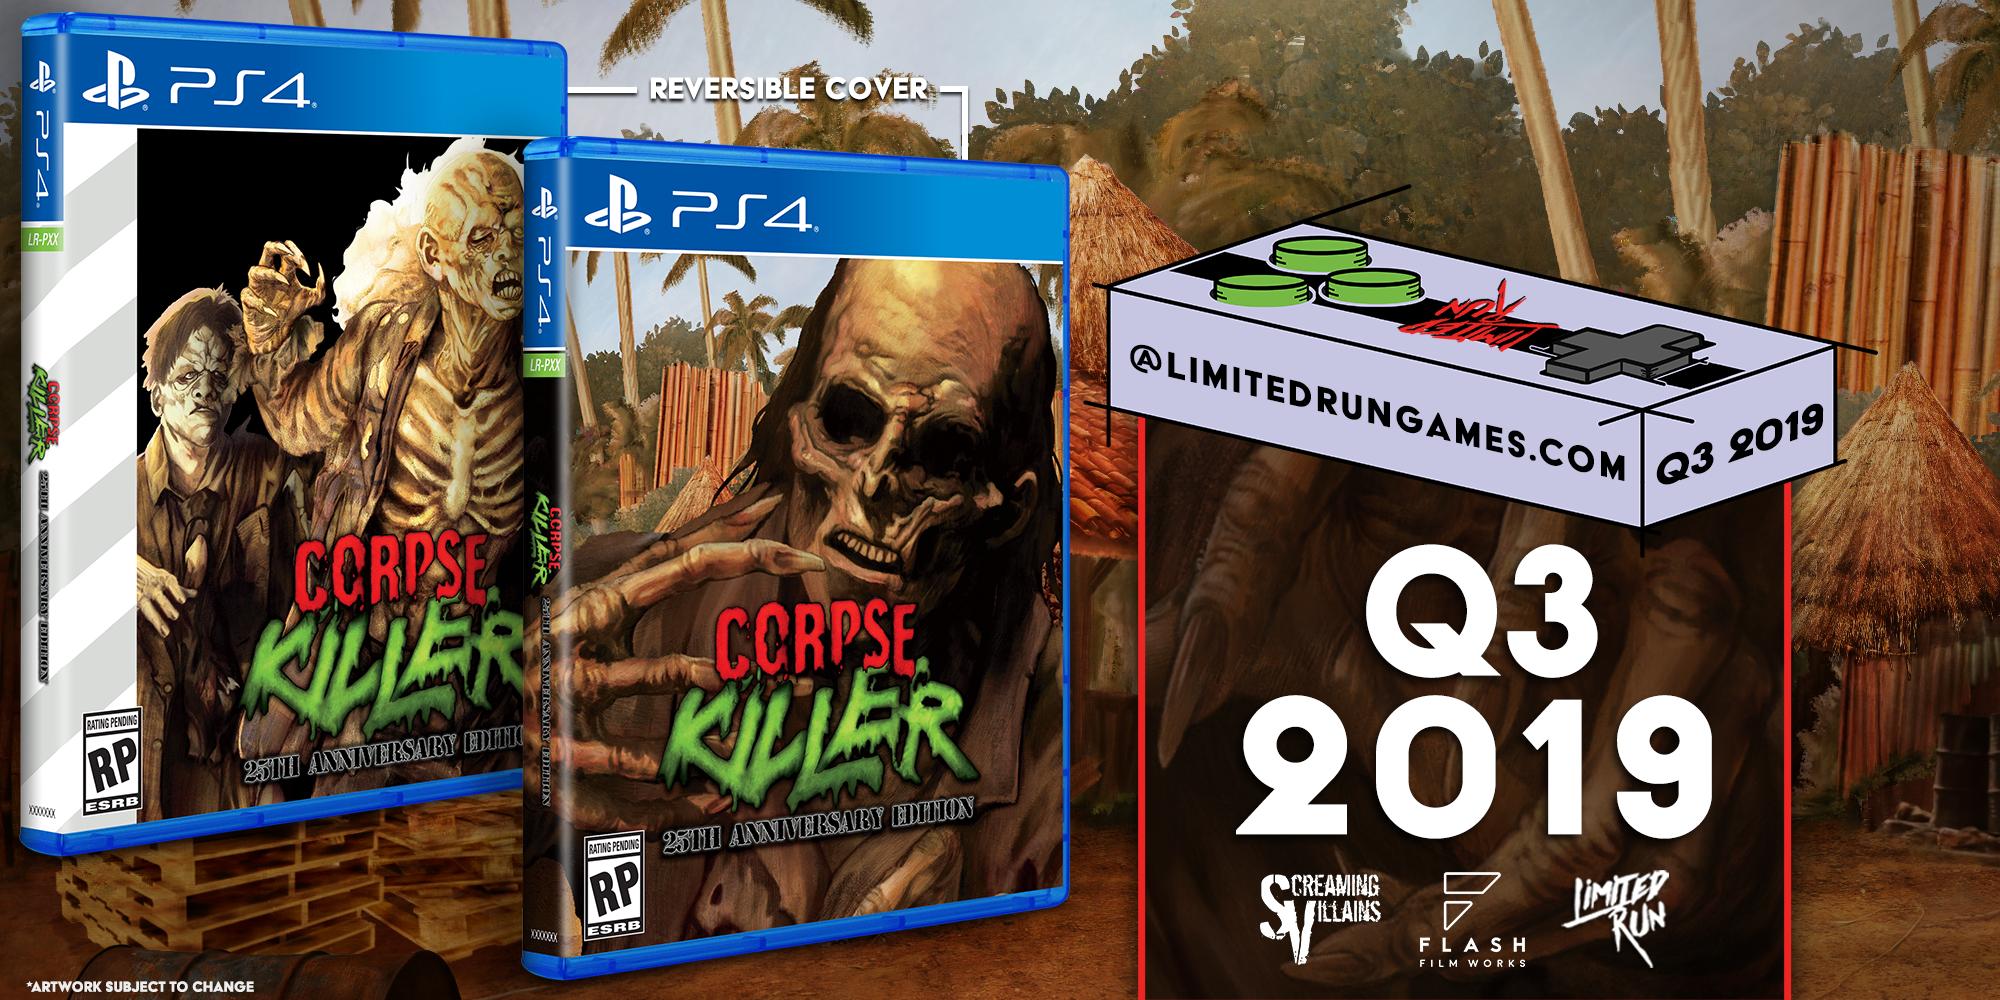 skilsmisse excentrisk ledsager Corpse Killer: 25th Anniversary Edition announced for PS4, PC - Gematsu